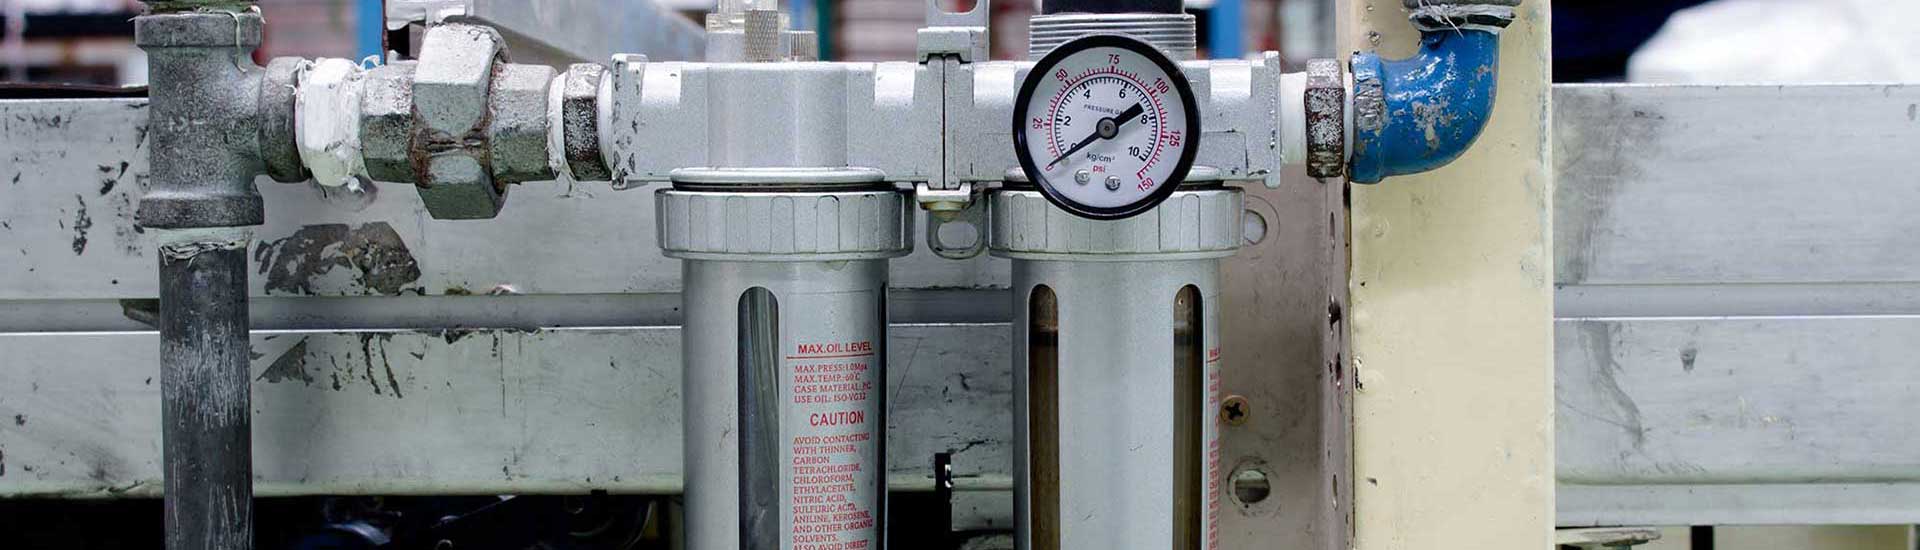 Compressed Air Regulators: The Design and Function